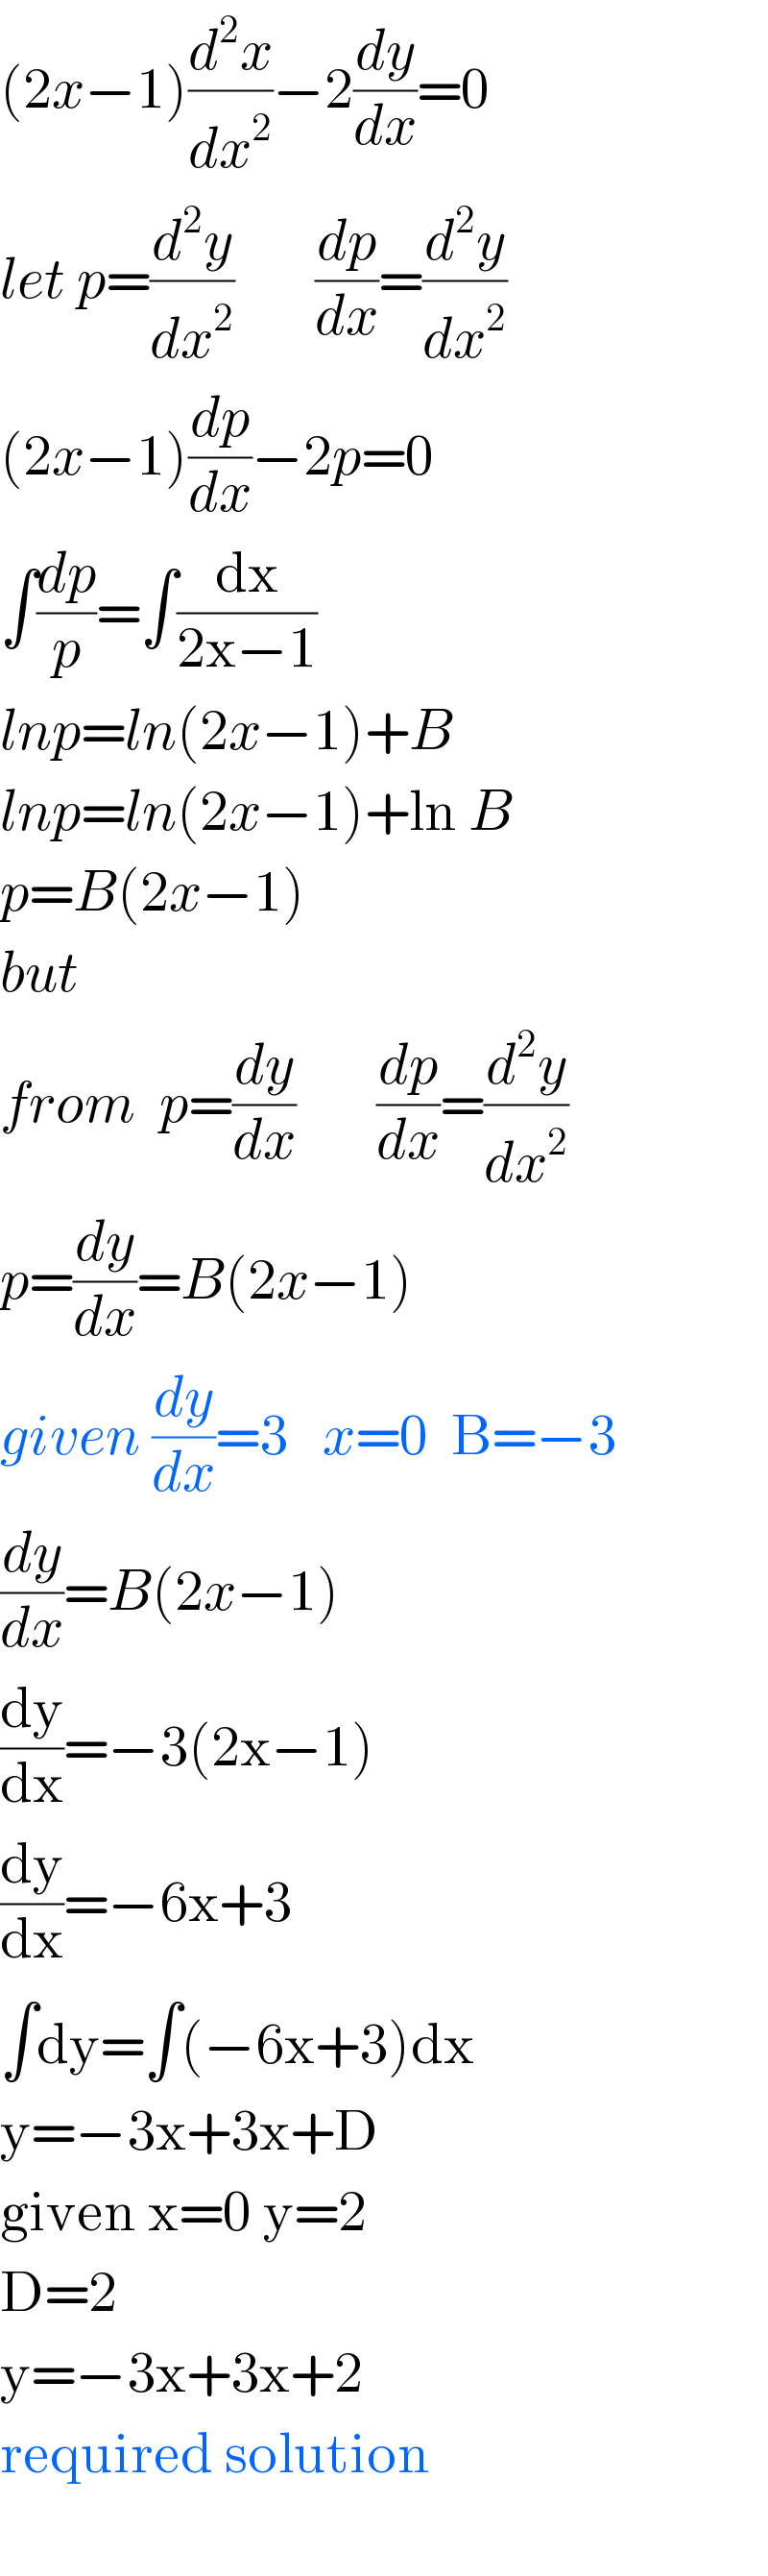 (2x−1)(d^2 x/dx^2 )−2(dy/dx)=0  let p=(d^2 y/dx^2 )       (dp/dx)=(d^2 y/dx^2 )  (2x−1)(dp/dx)−2p=0  ∫(dp/p)=∫(dx/(2x−1))  lnp=ln(2x−1)+B  lnp=ln(2x−1)+ln B  p=B(2x−1)  but  from  p=(dy/dx)       (dp/dx)=(d^2 y/dx^2 )  p=(dy/dx)=B(2x−1)  given (dy/dx)=3   x=0  B=−3  (dy/dx)=B(2x−1)  (dy/dx)=−3(2x−1)  (dy/dx)=−6x+3  ∫dy=∫(−6x+3)dx  y=−3x+3x+D  given x=0 y=2  D=2  y=−3x+3x+2  required solution    